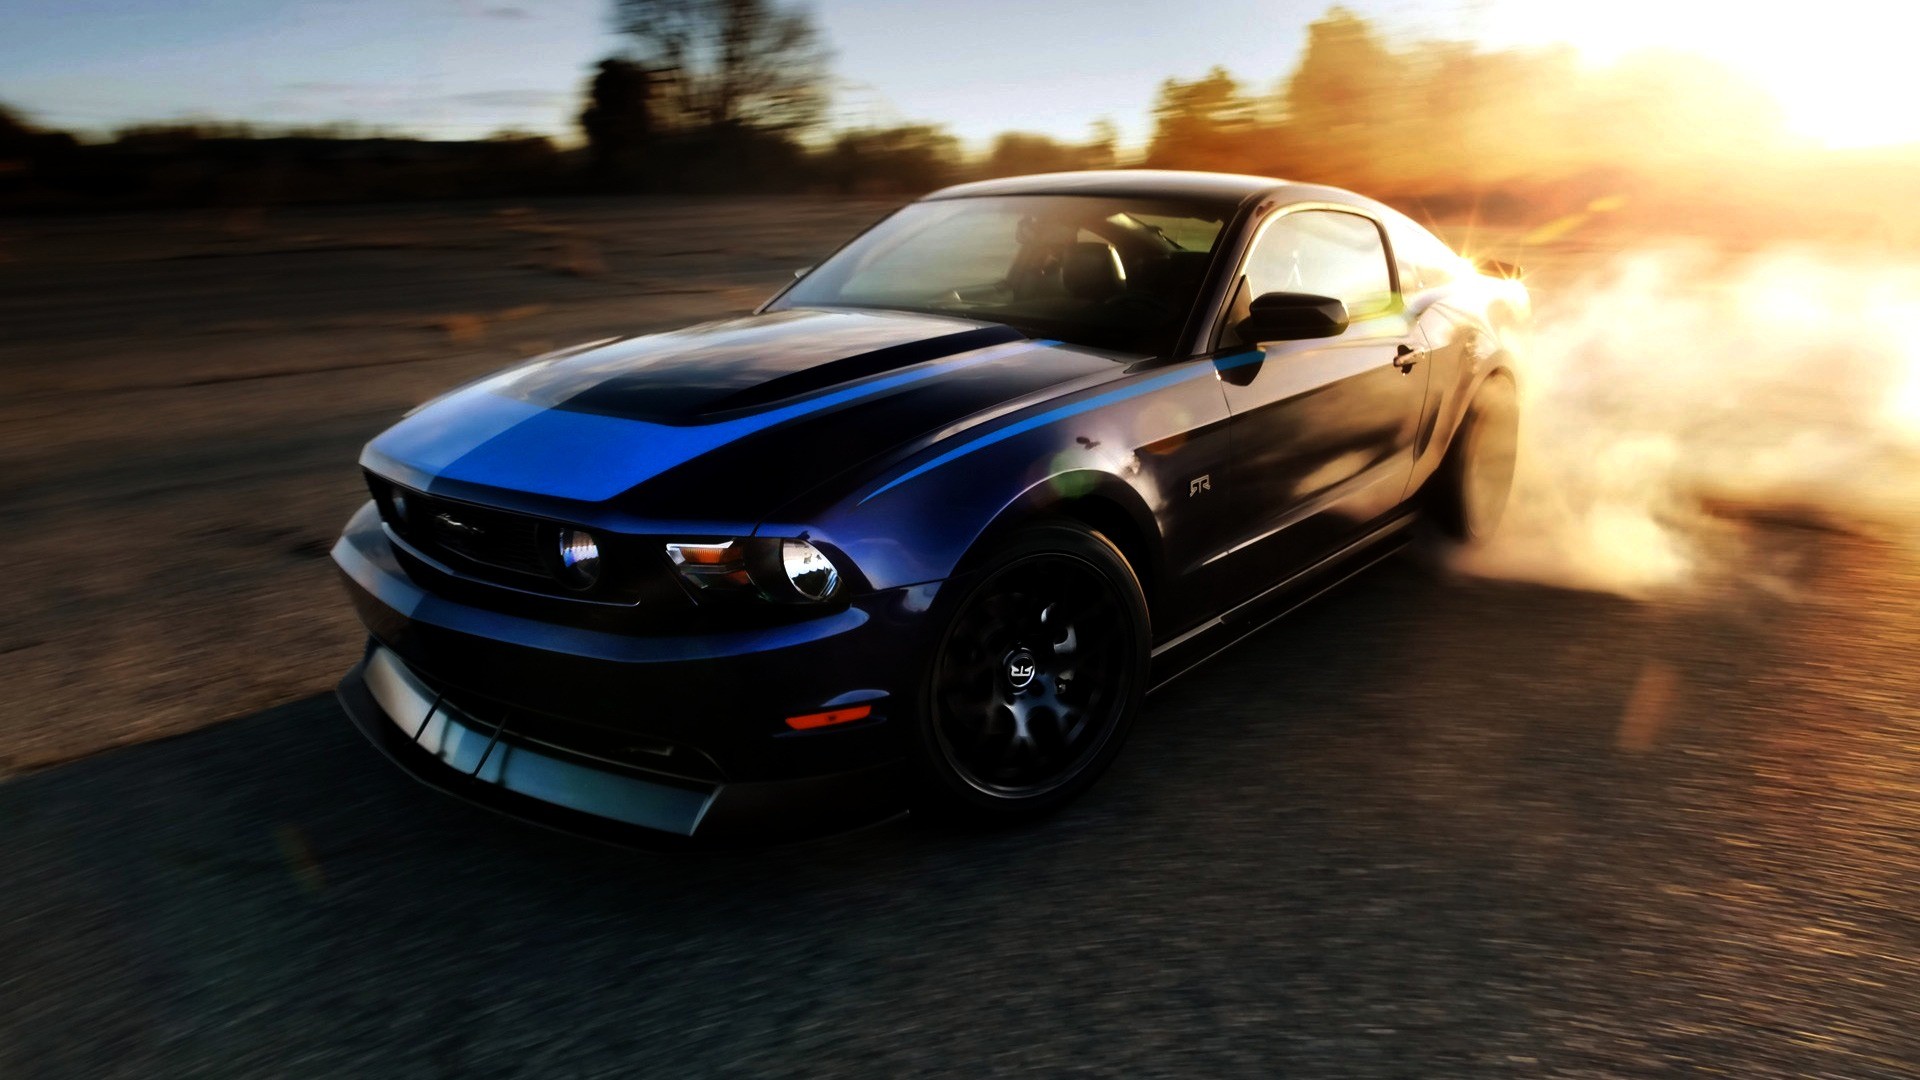 Ford Mustang Wallpaper HD New Template Image